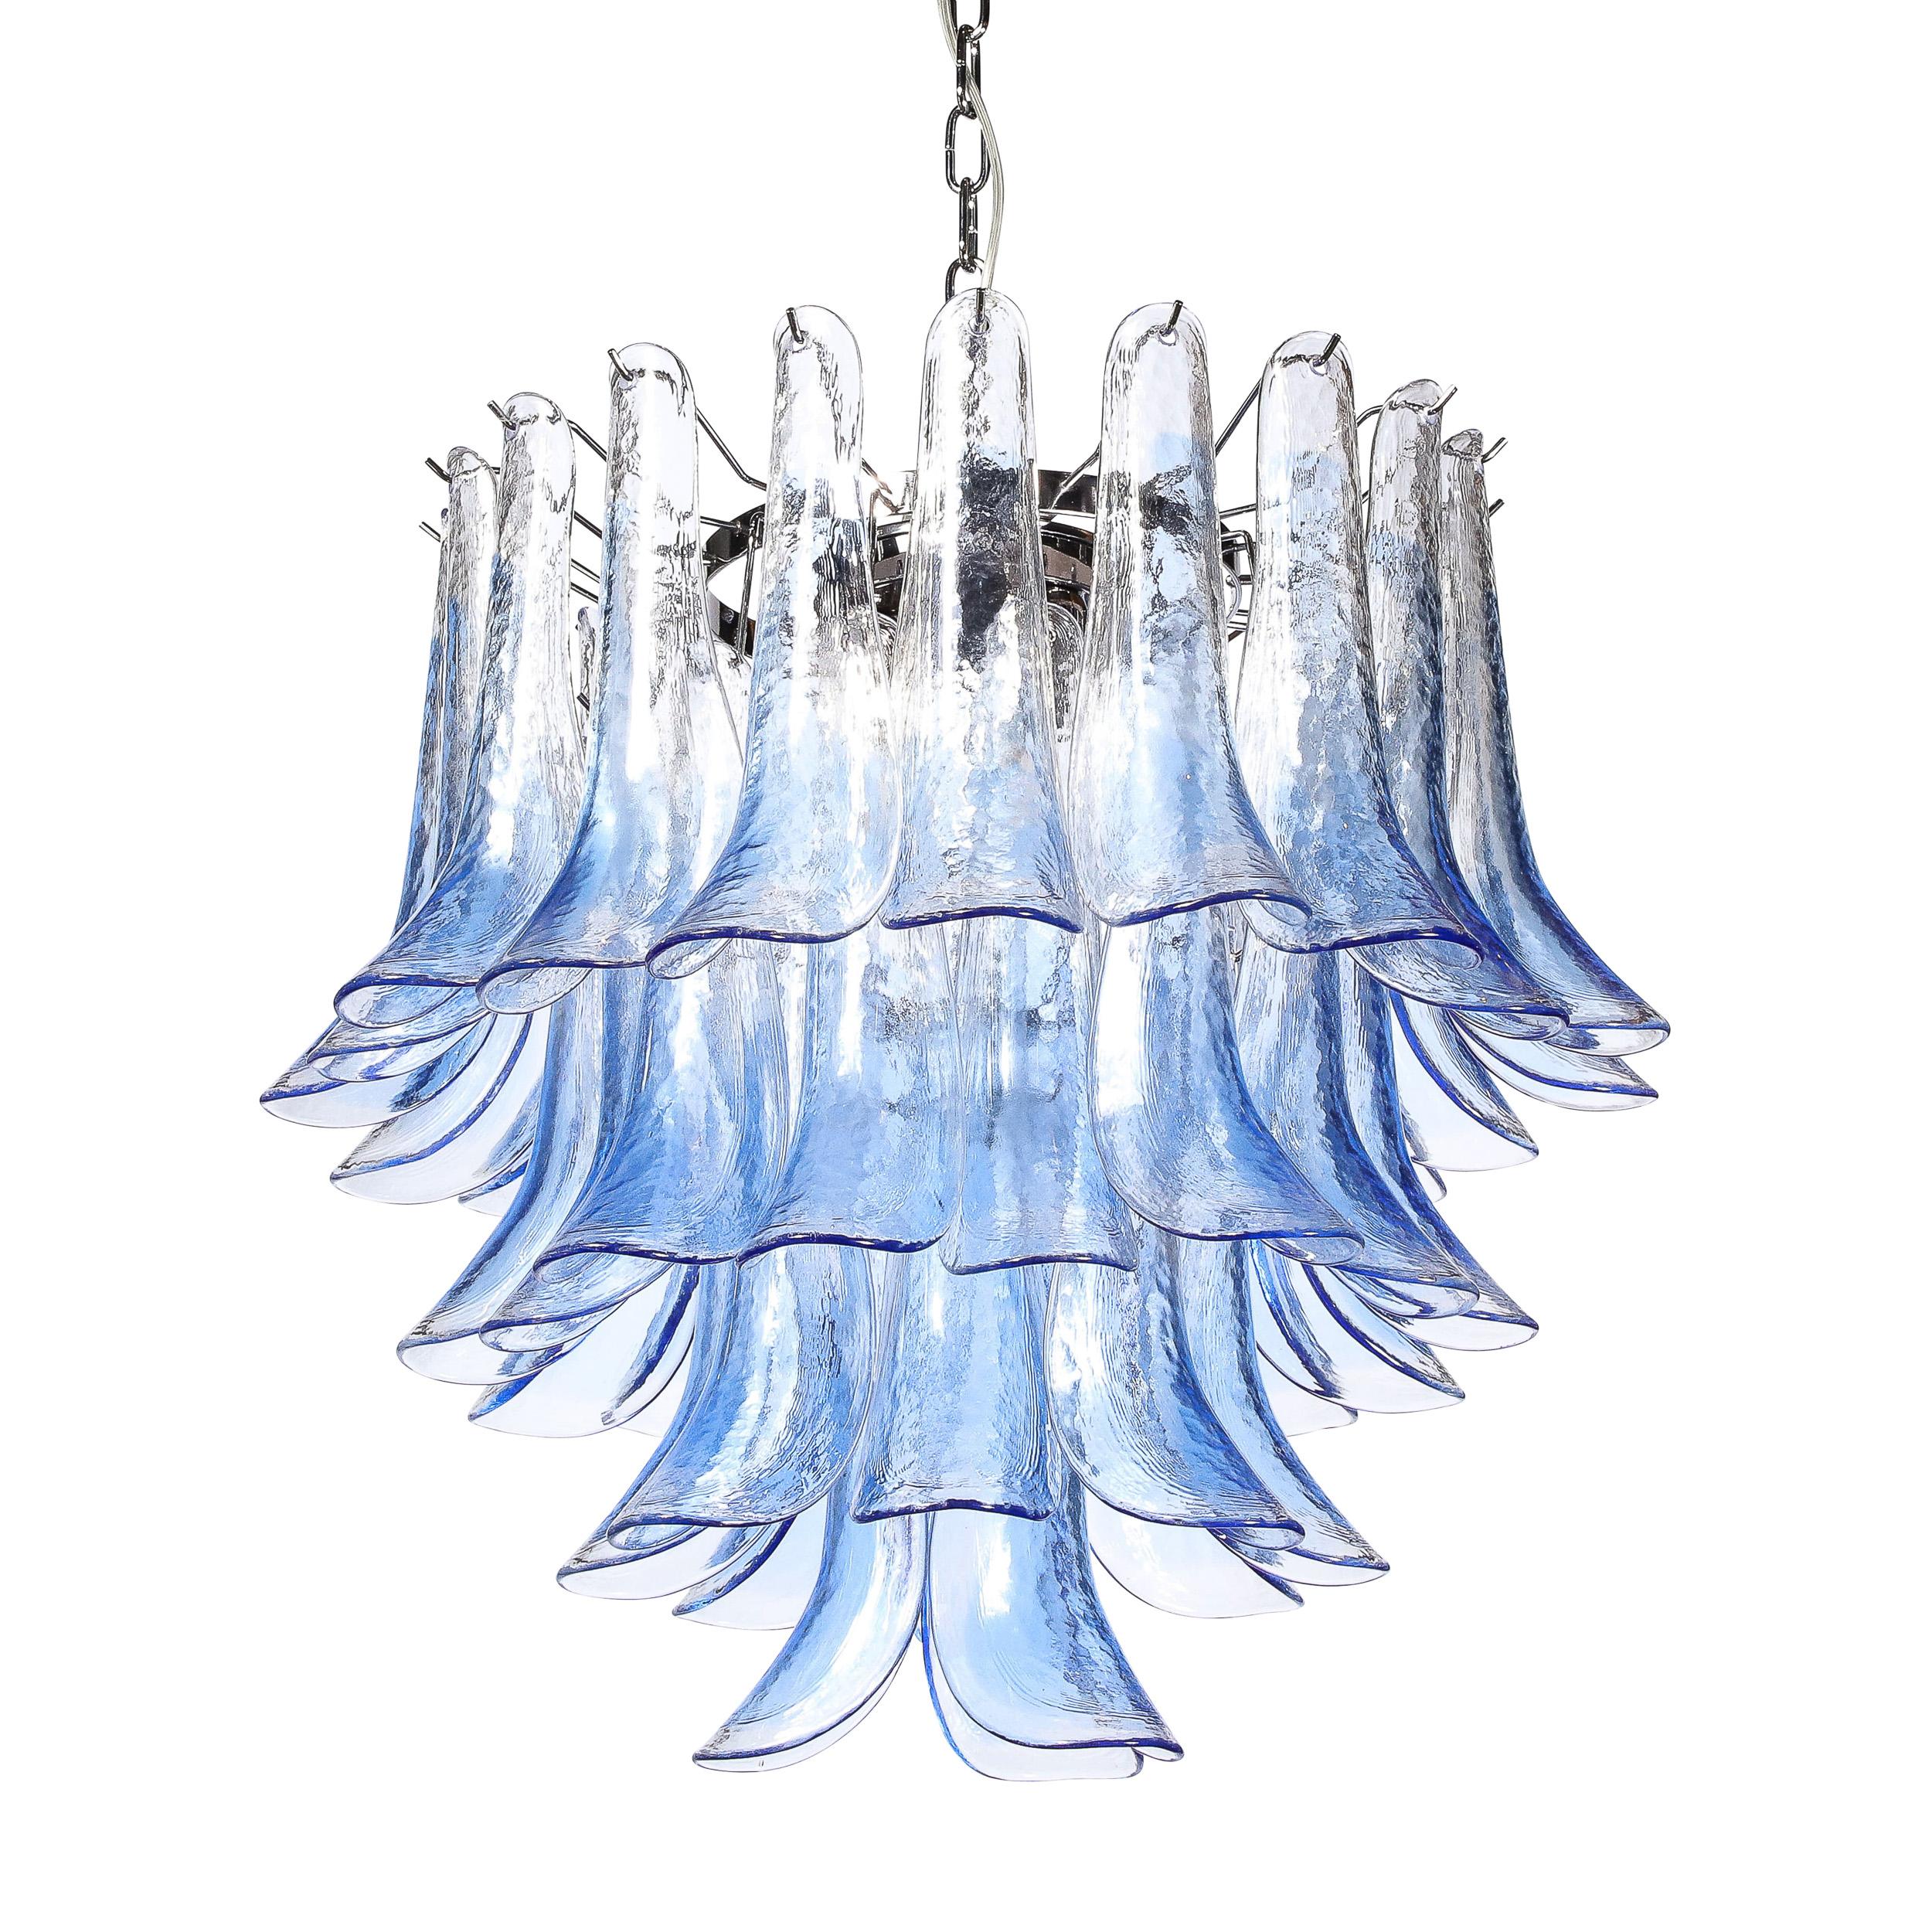 This lovely Modernist Hand-Blown Murano Glass Four-Tier Feather Chandelier in Cornflower Blue Originates from Italy during the Latter half of the 20th Century. With a chrome frame and fittings and rendered in lovely partially translucent  blue